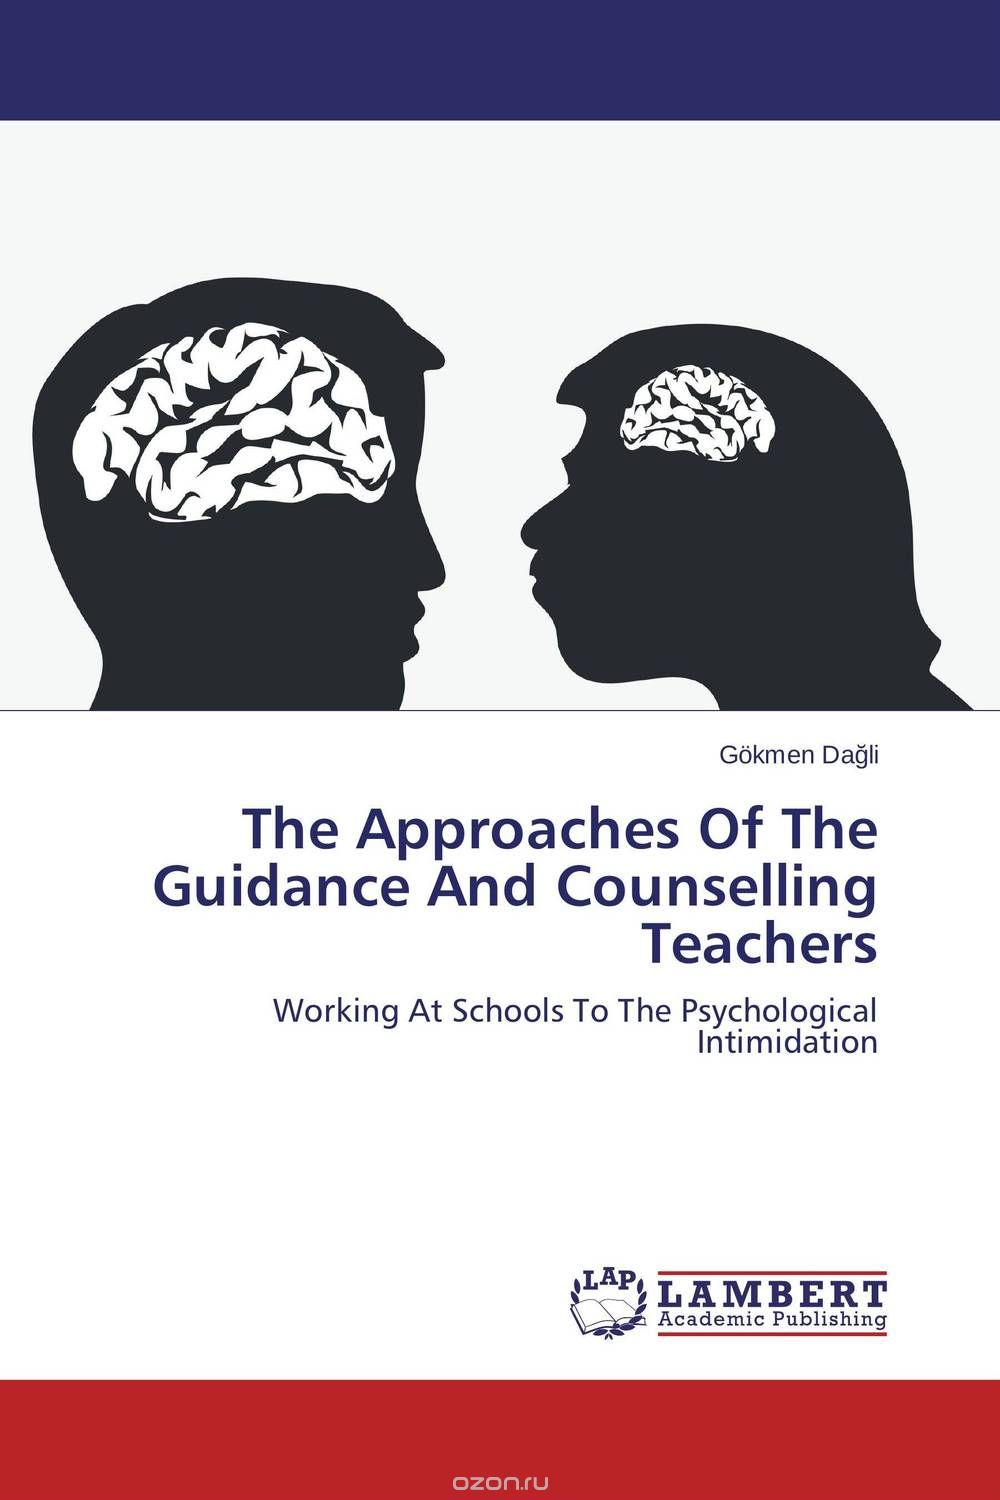 The Approaches Of The Guidance And Counselling Teachers